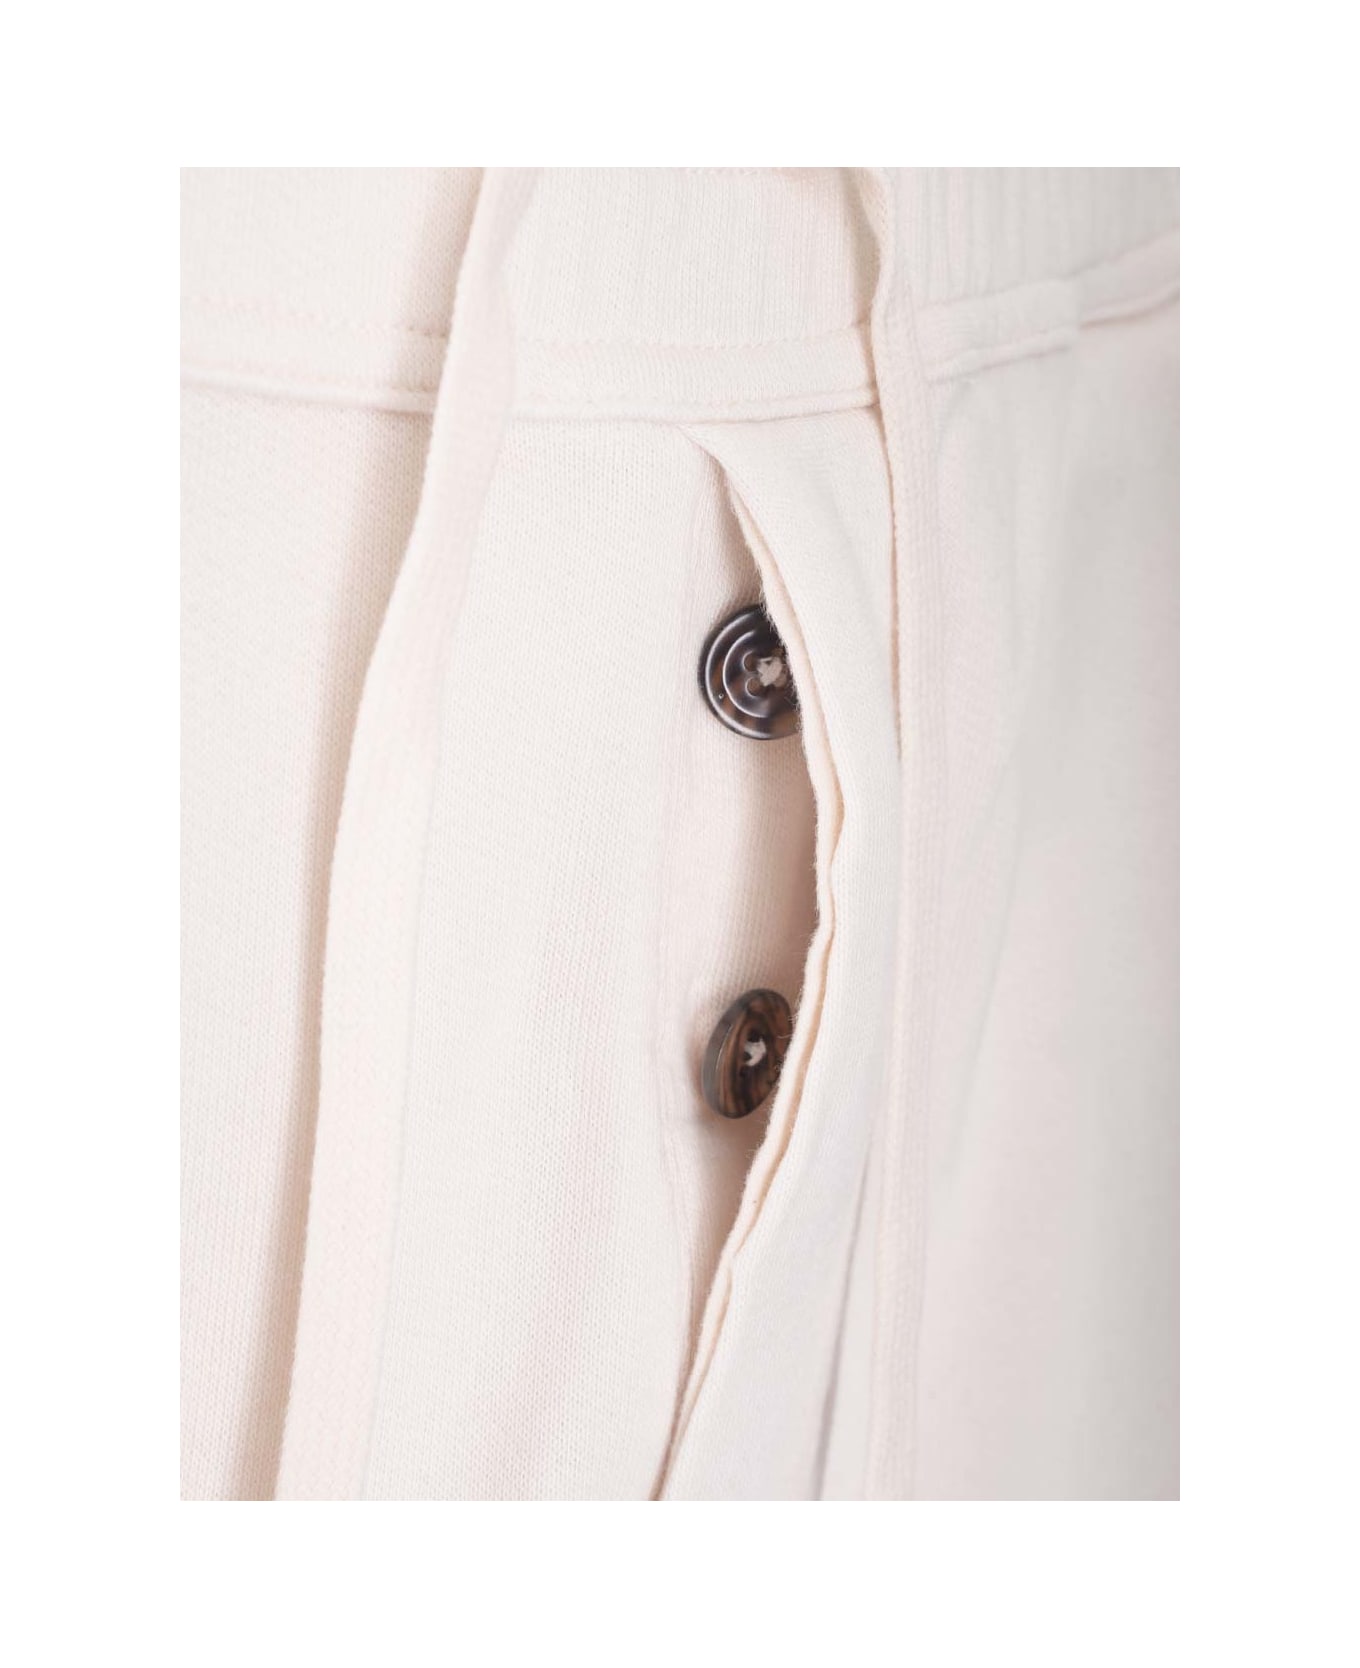 Tom Ford White Lounge Trousers - Ivory